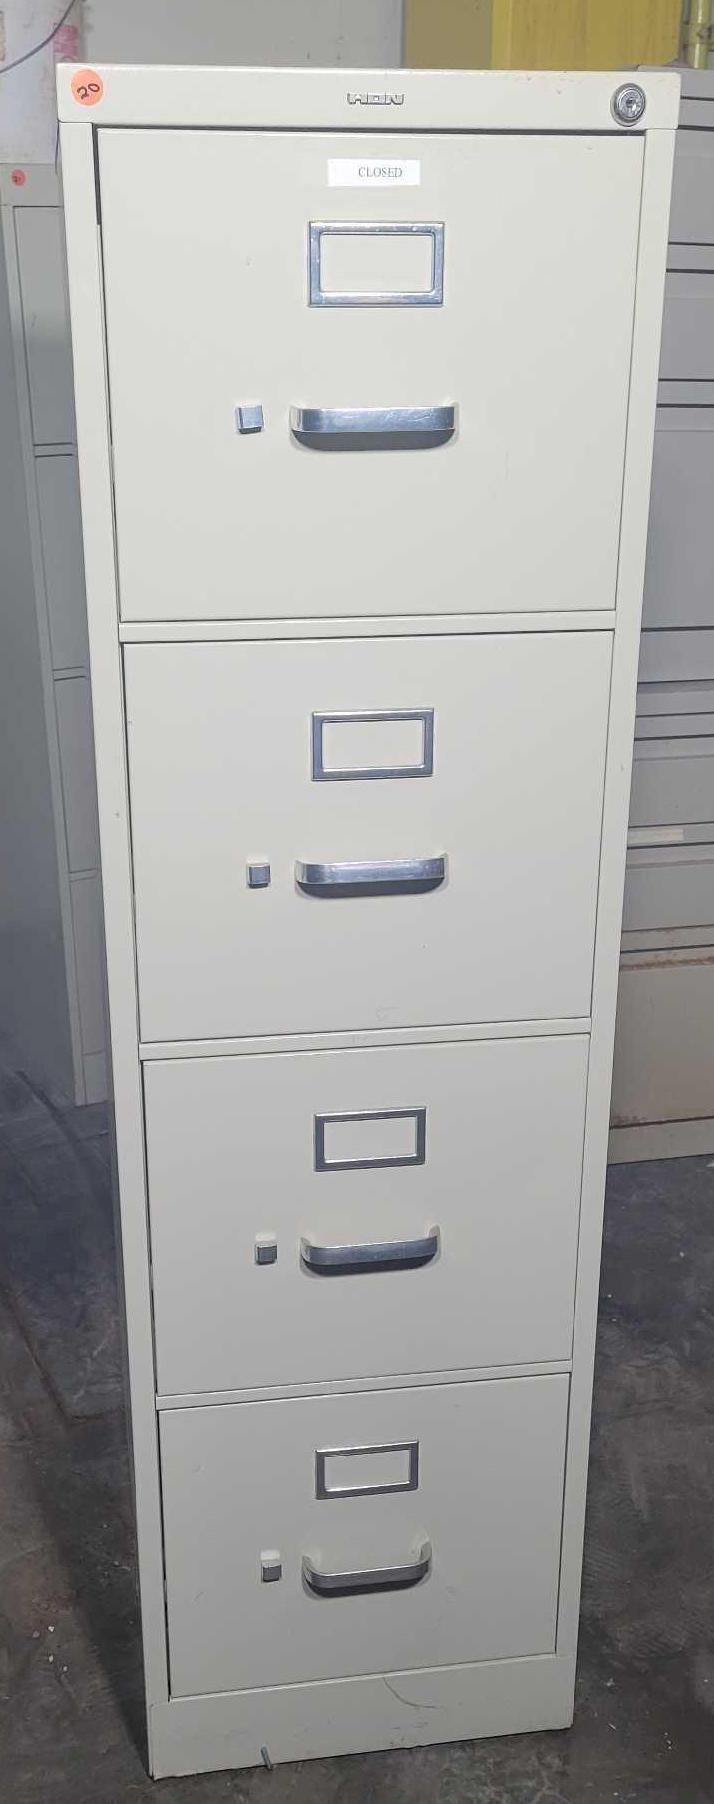 Filing Cabinet $10 STS